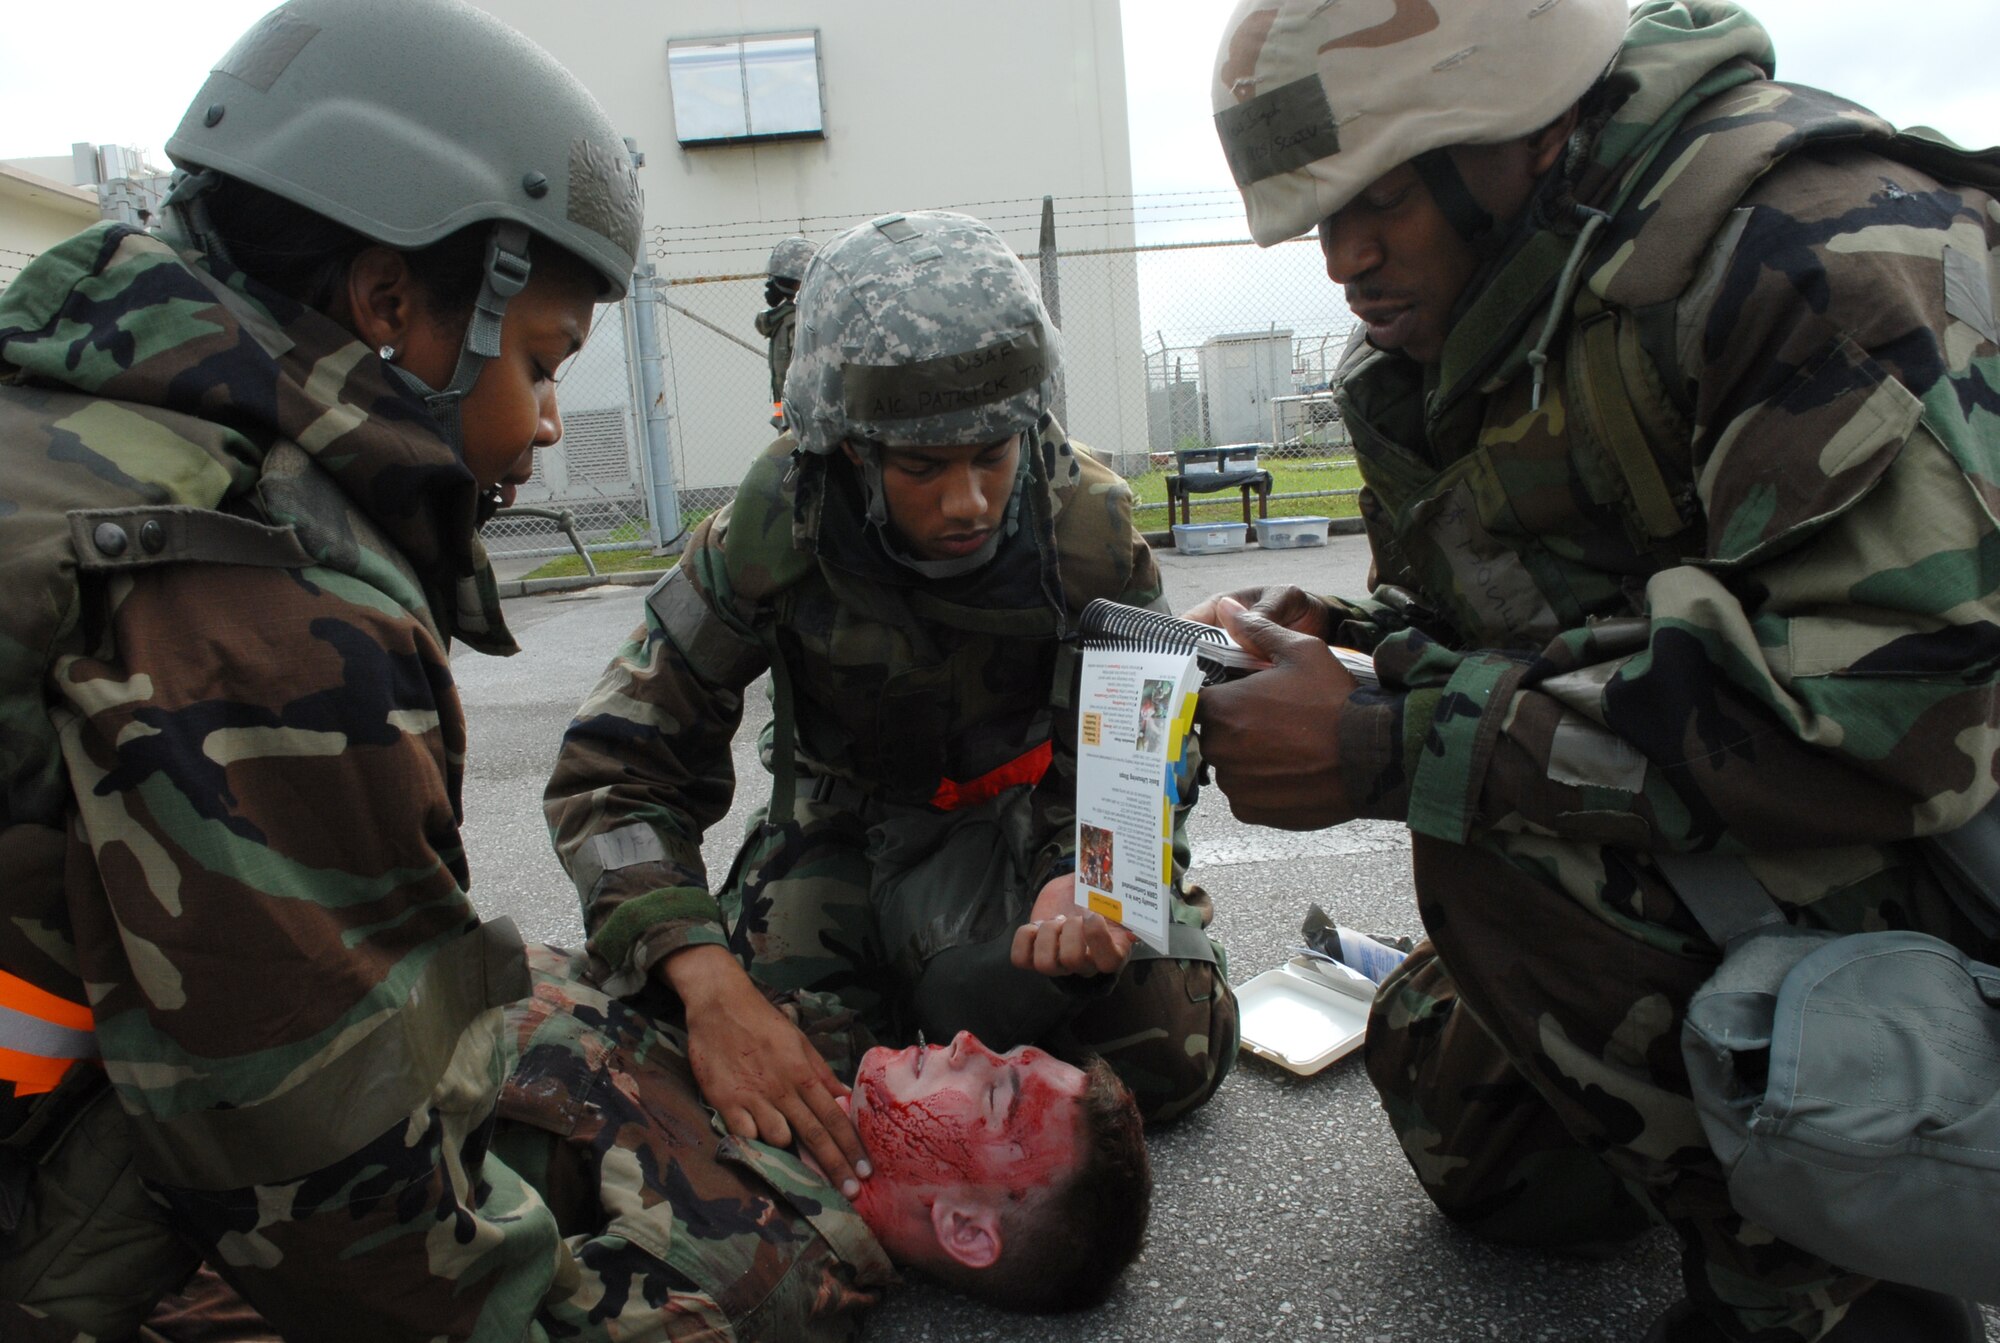 Master Sgt. Felisha Haman, Airman 1st Class Patrick Taylor and Tech. Sgt Marcus Joseph, all members of the 18th Communications Squadron, provide first aid care to Airman 1st Class Nickolaus Miller from the 33rd Aircraft Maintenance Unit in a training scenario during the local operational readiness exercise at Kadena Air Base Oct. 22. (U.S. Air Force photo / Junko Kinjo)